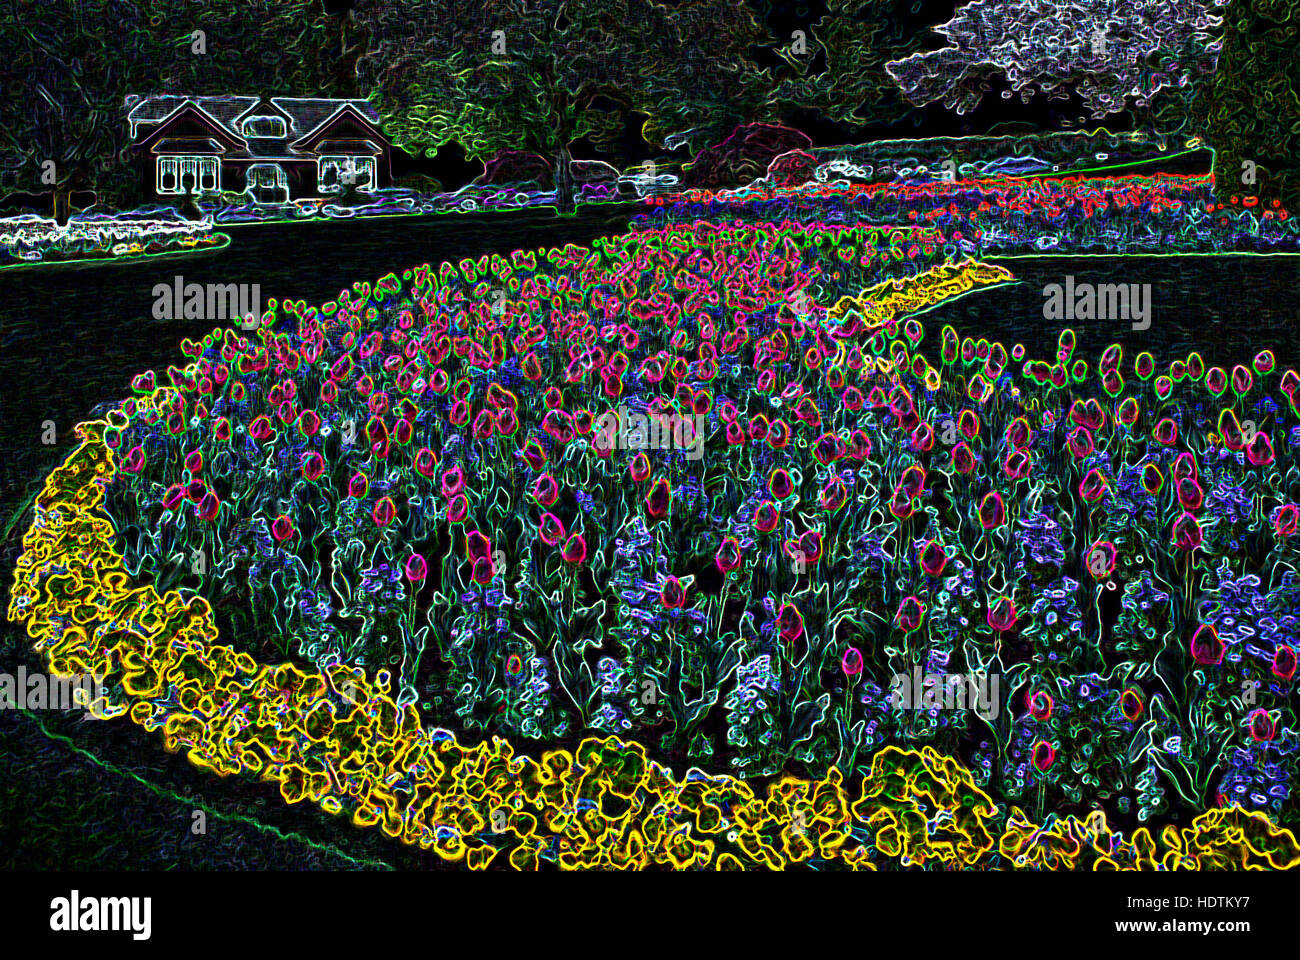 Flowers blooming in Flower Garden - Digitally Manipulated Image with Glowing Edges, Abstract Landscape on a Black Background Stock Photo